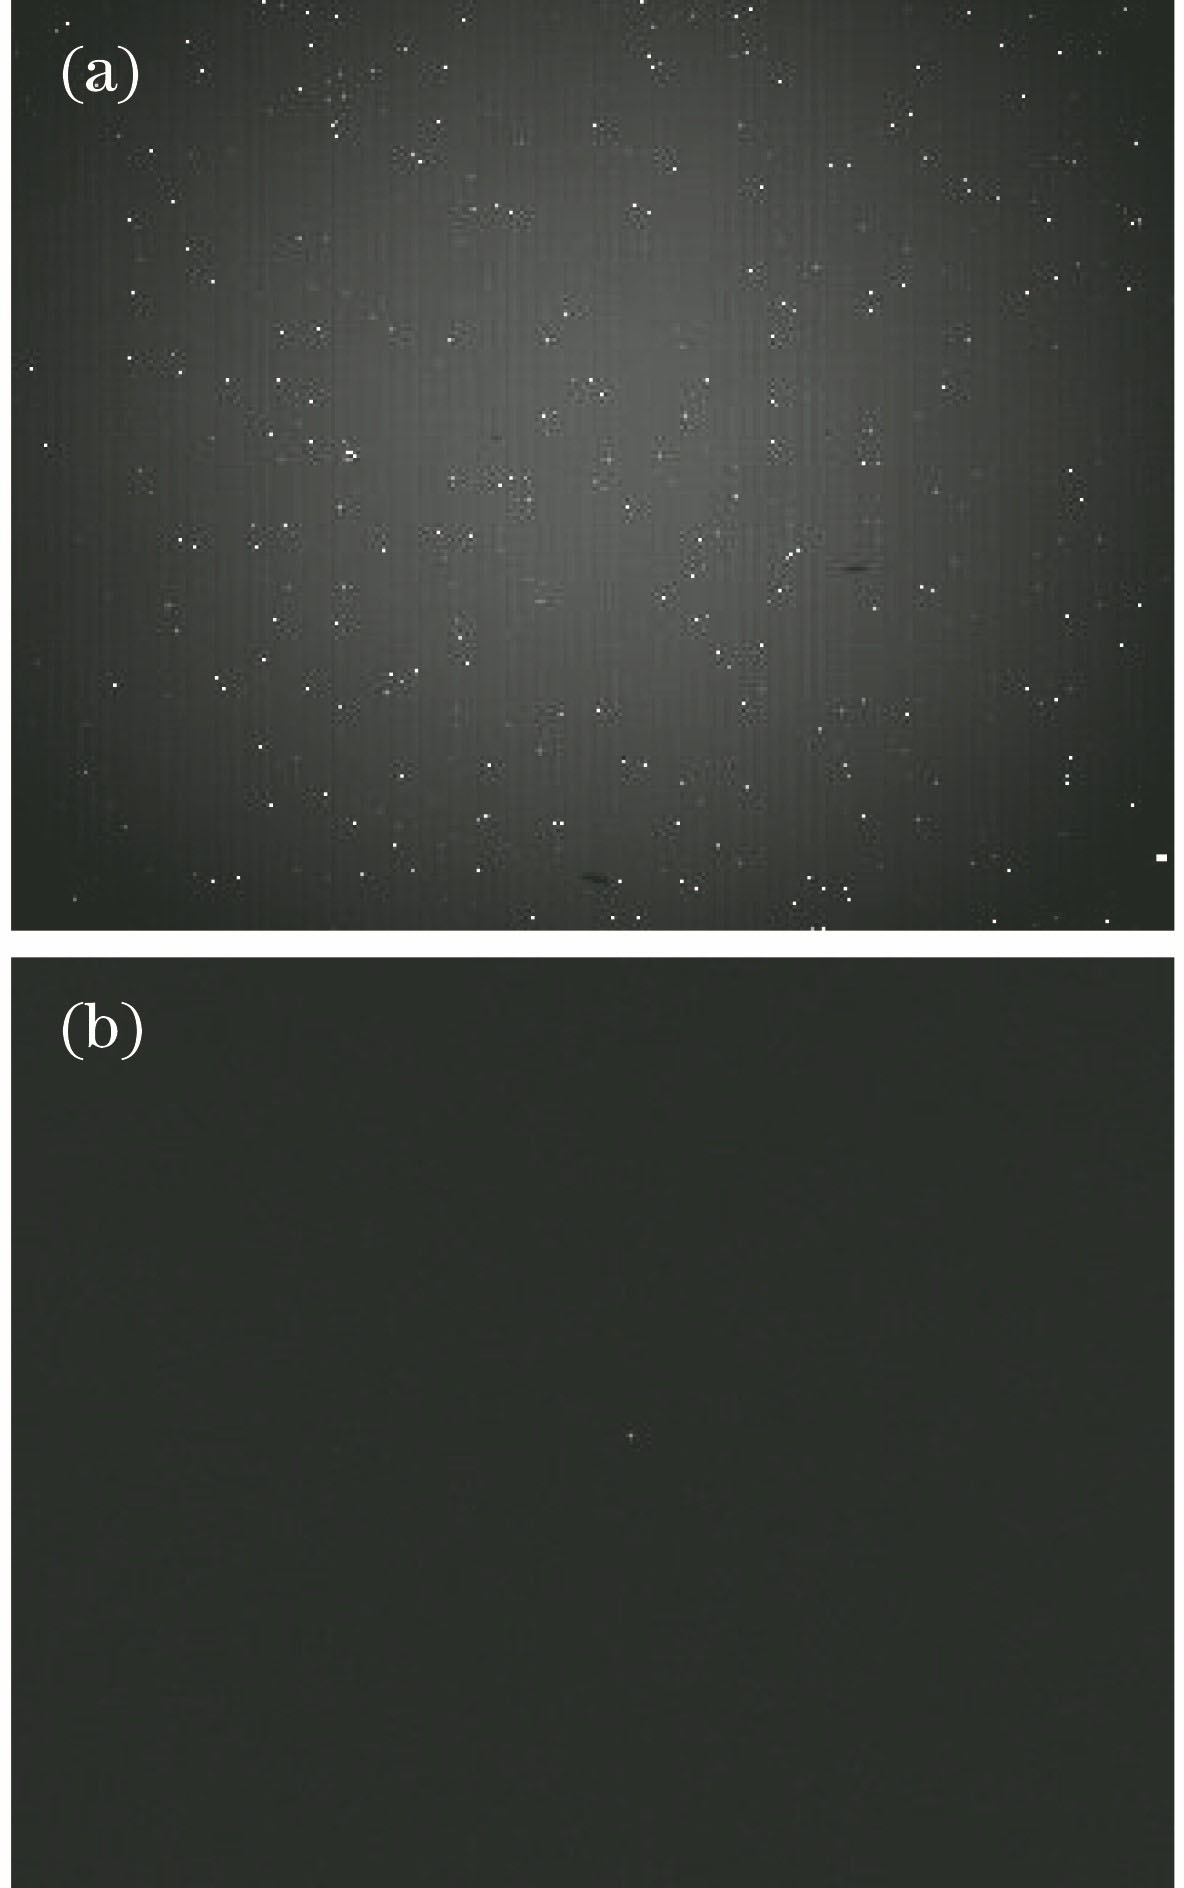 (a) Original image; (b) stellar image after two-point correction